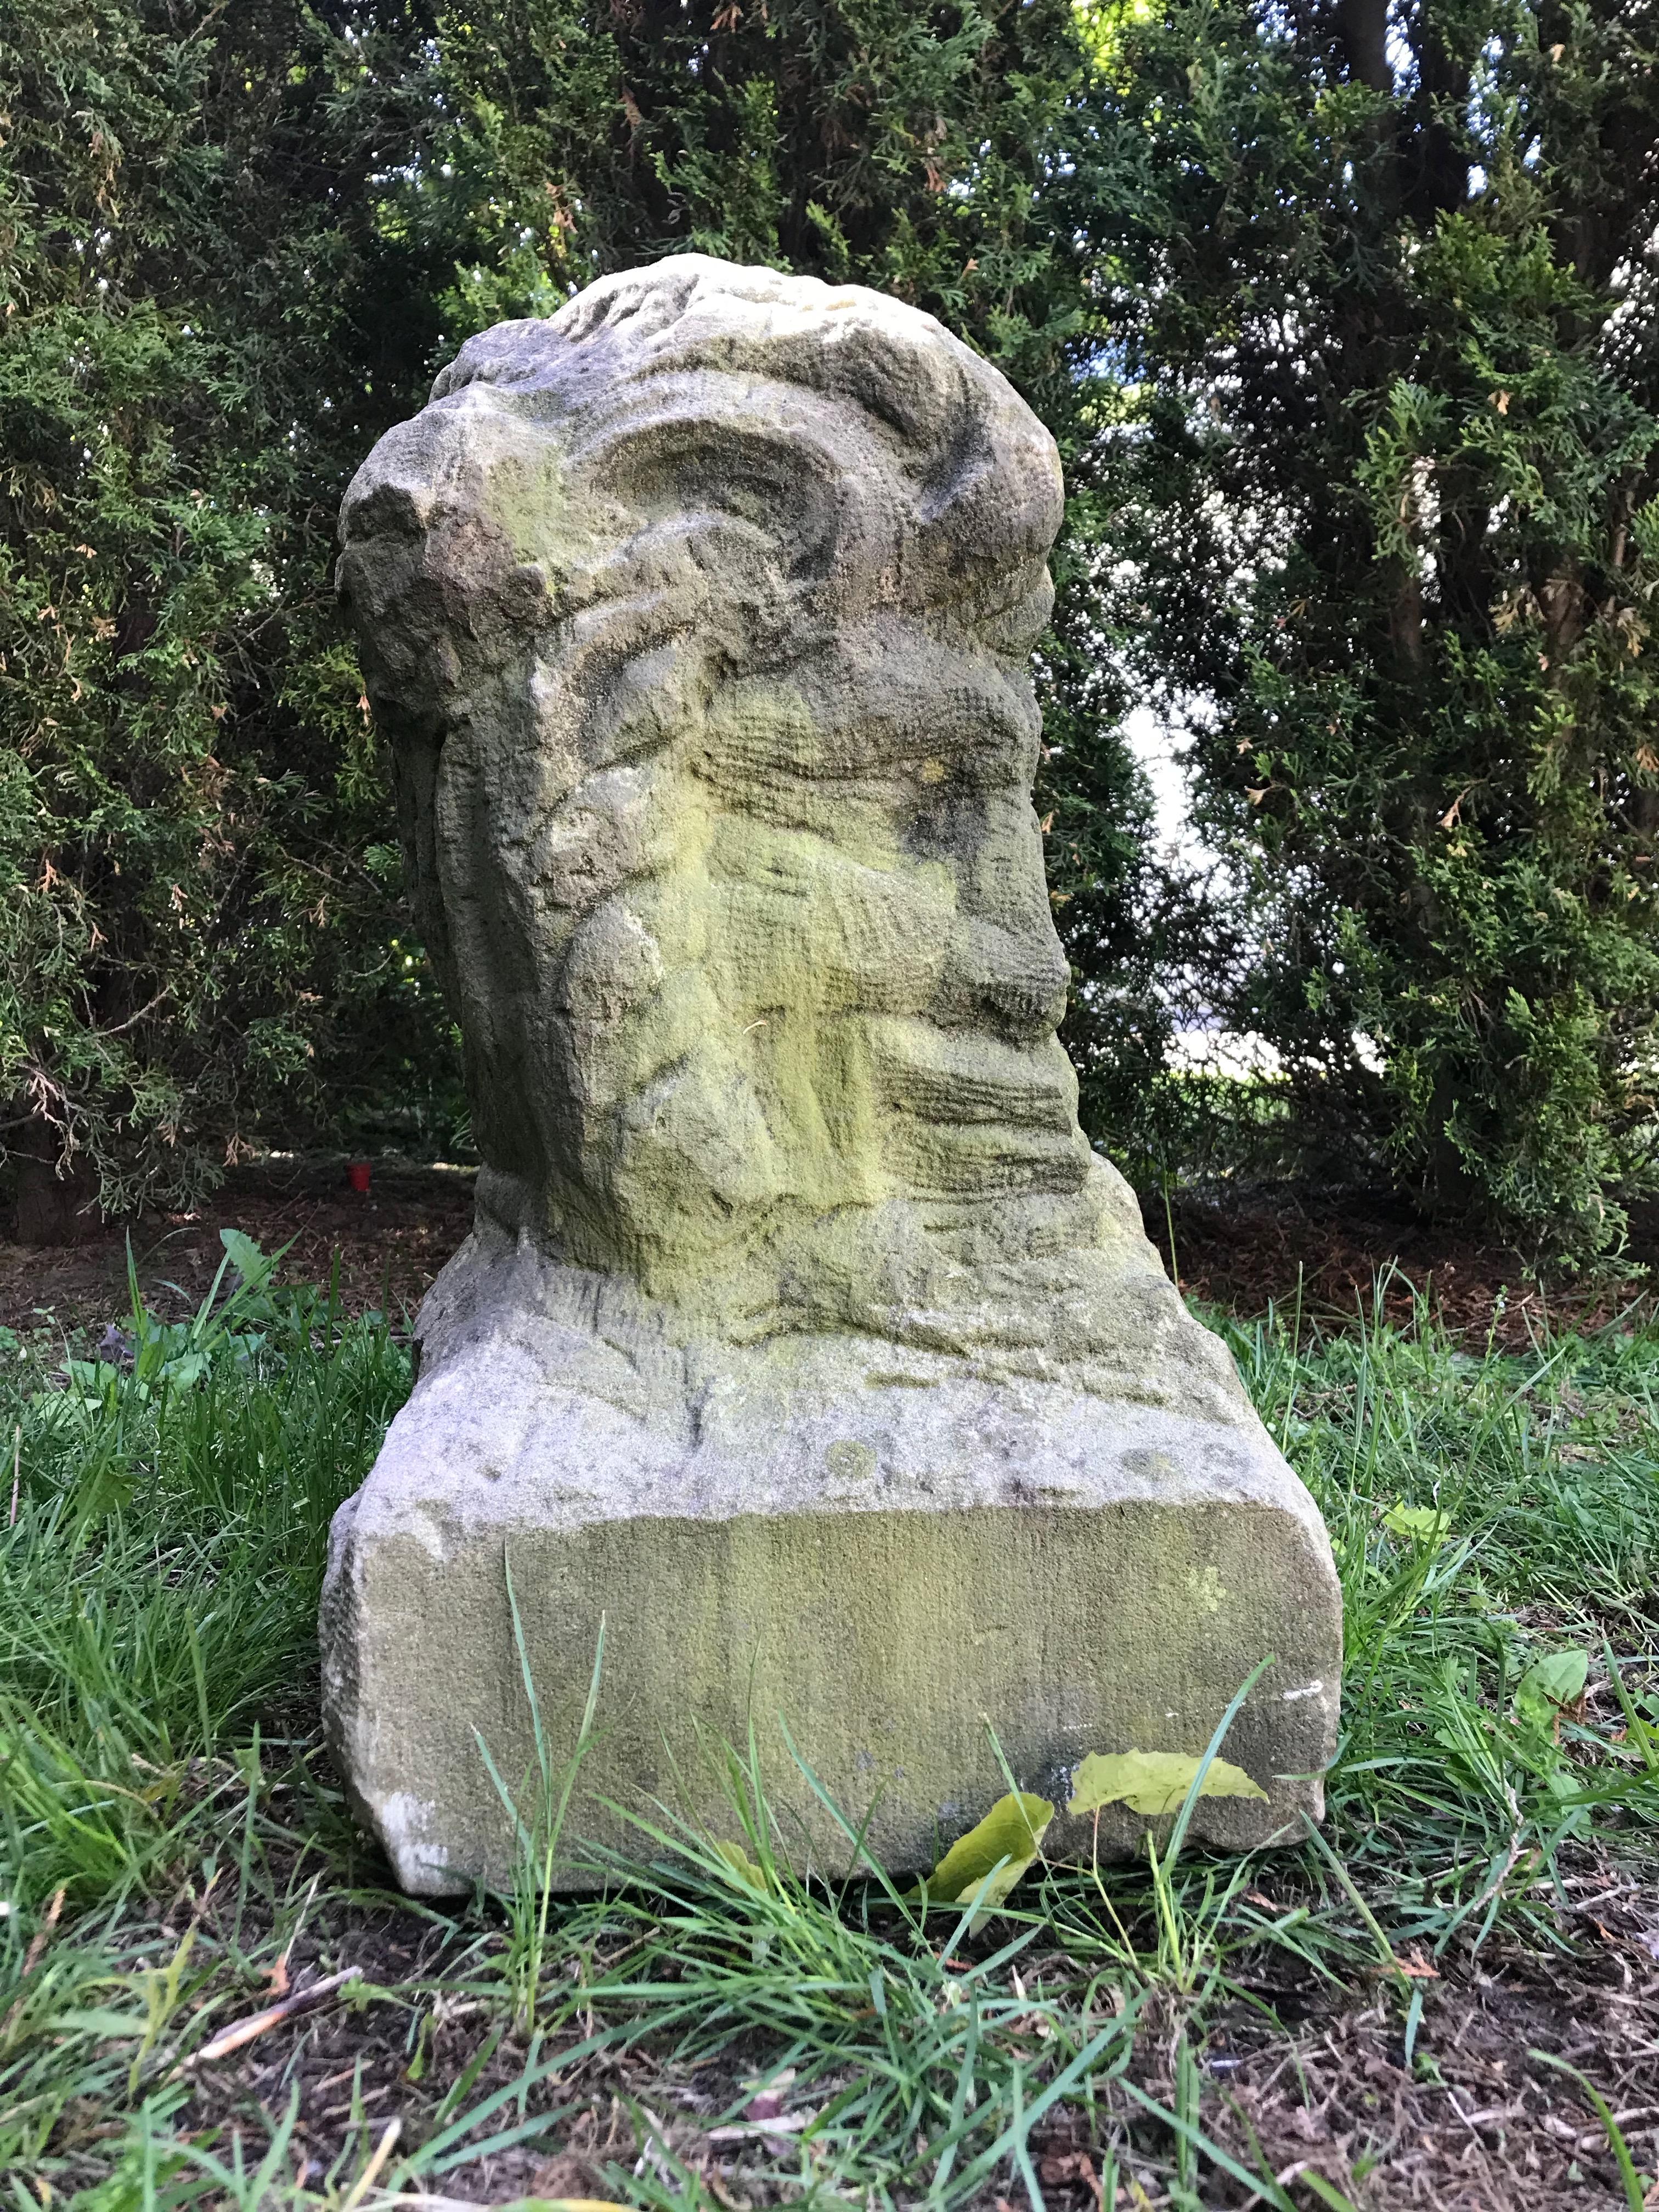 What a find! This large hand-carved sandstone bust of Cernunnos, the horned Celtic god of the forest and also known as the 